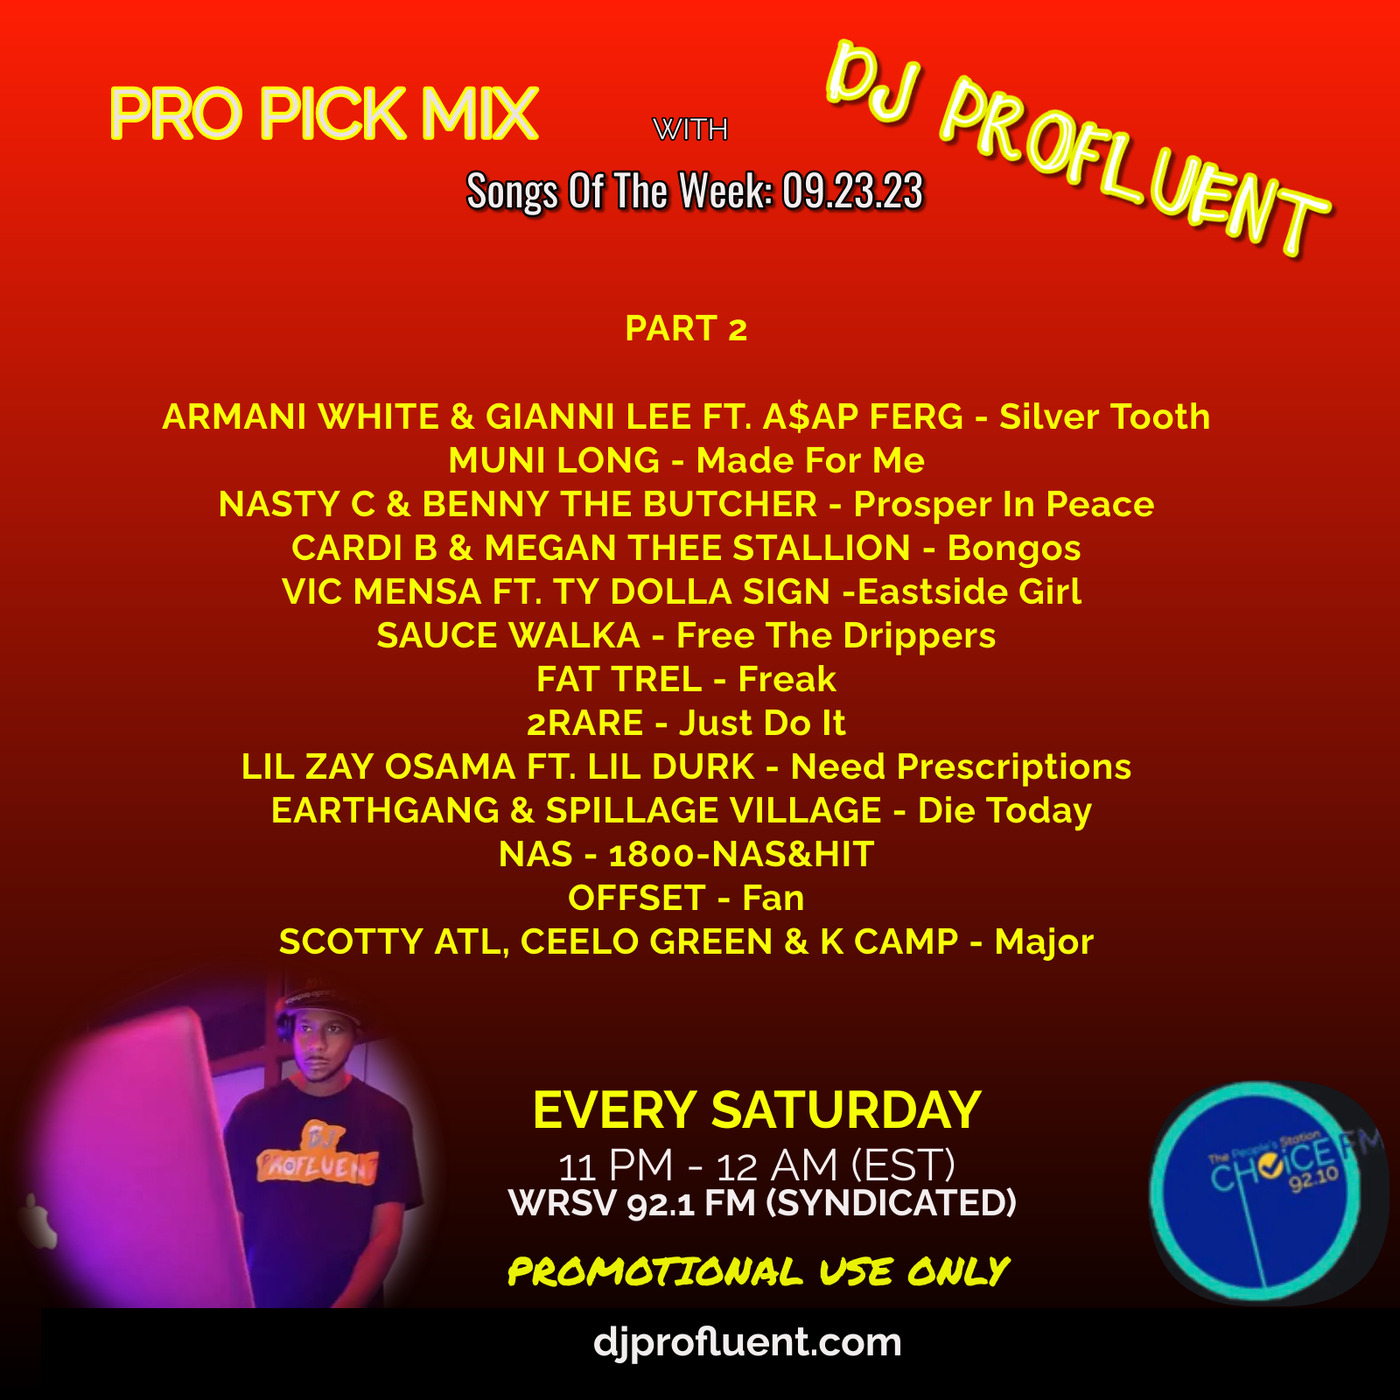 Clean Hip Hop Mix_ Vol 36-9-23-2023_Part 2 Feat Music By [Armani White, Fat Treal, Lil Zay Osama, Earthgang, Scotty ATL]